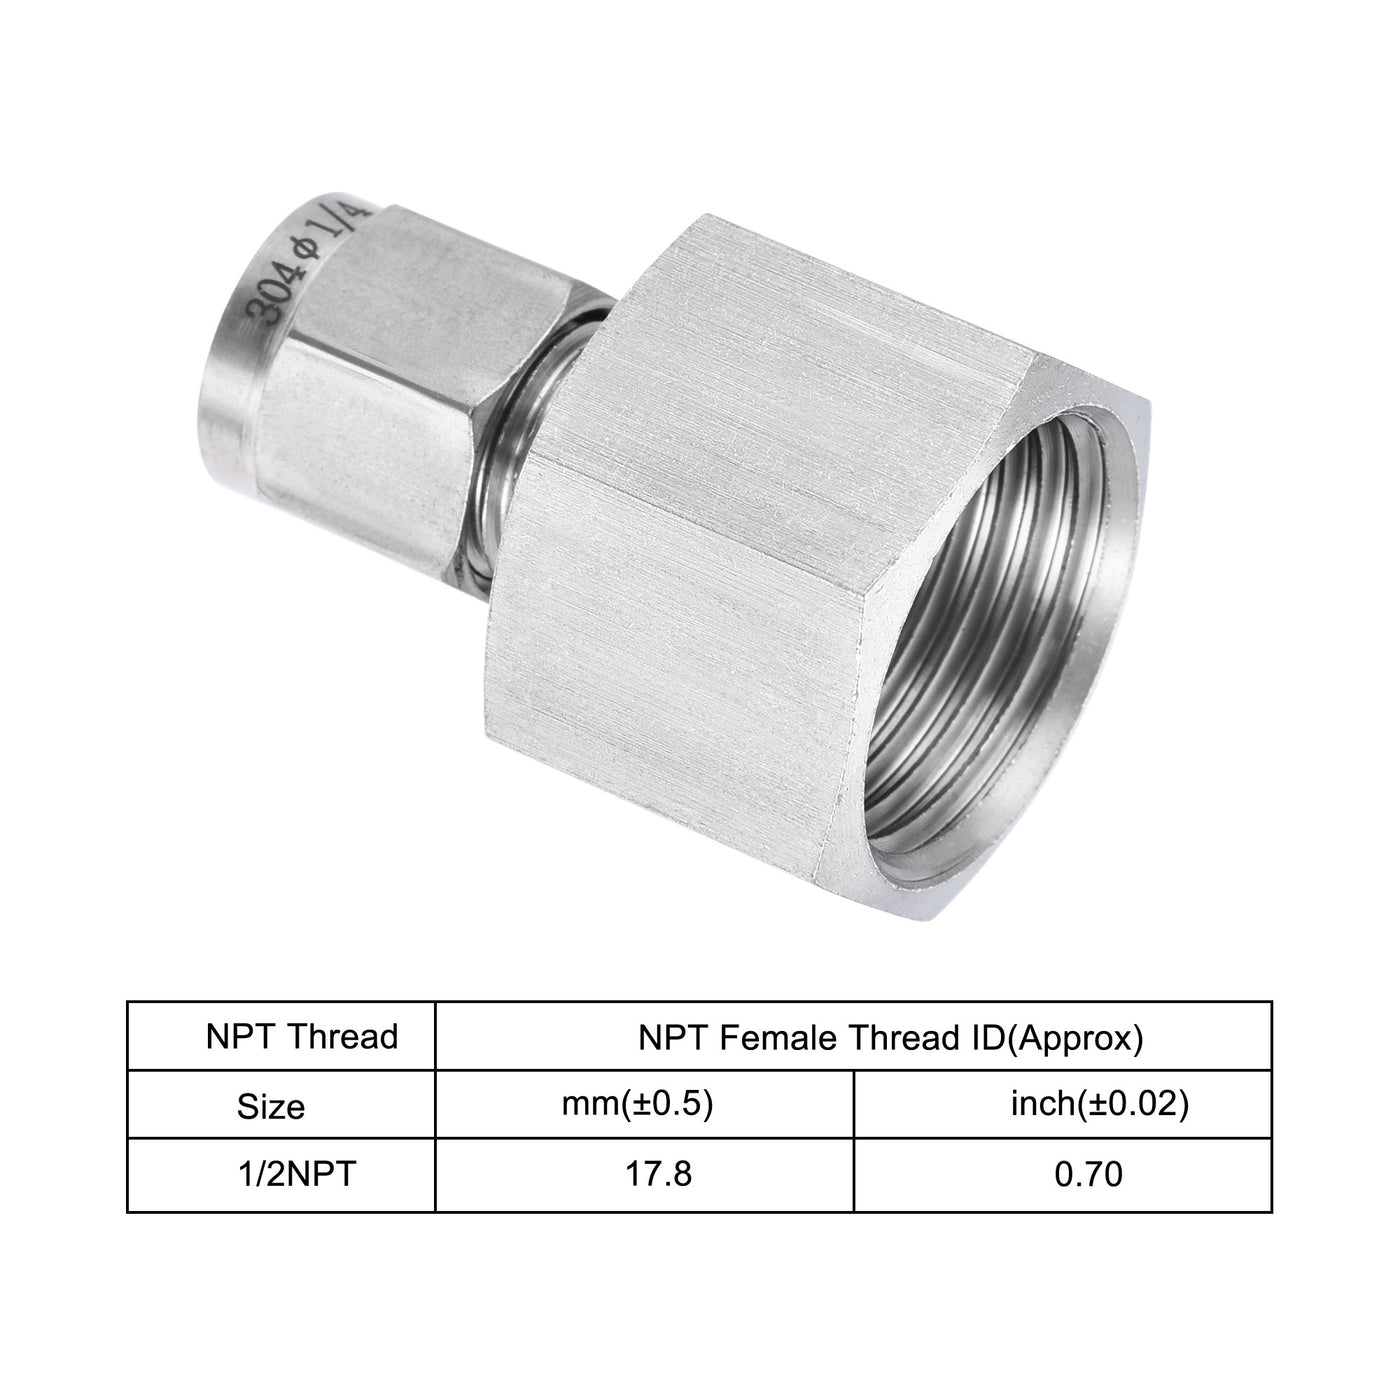 Uxcell Uxcell Compression Tube Fitting 1/8NPT Female Thread x 1/4" Tube OD Straight Coupling Adapter 304 Stainless Steel